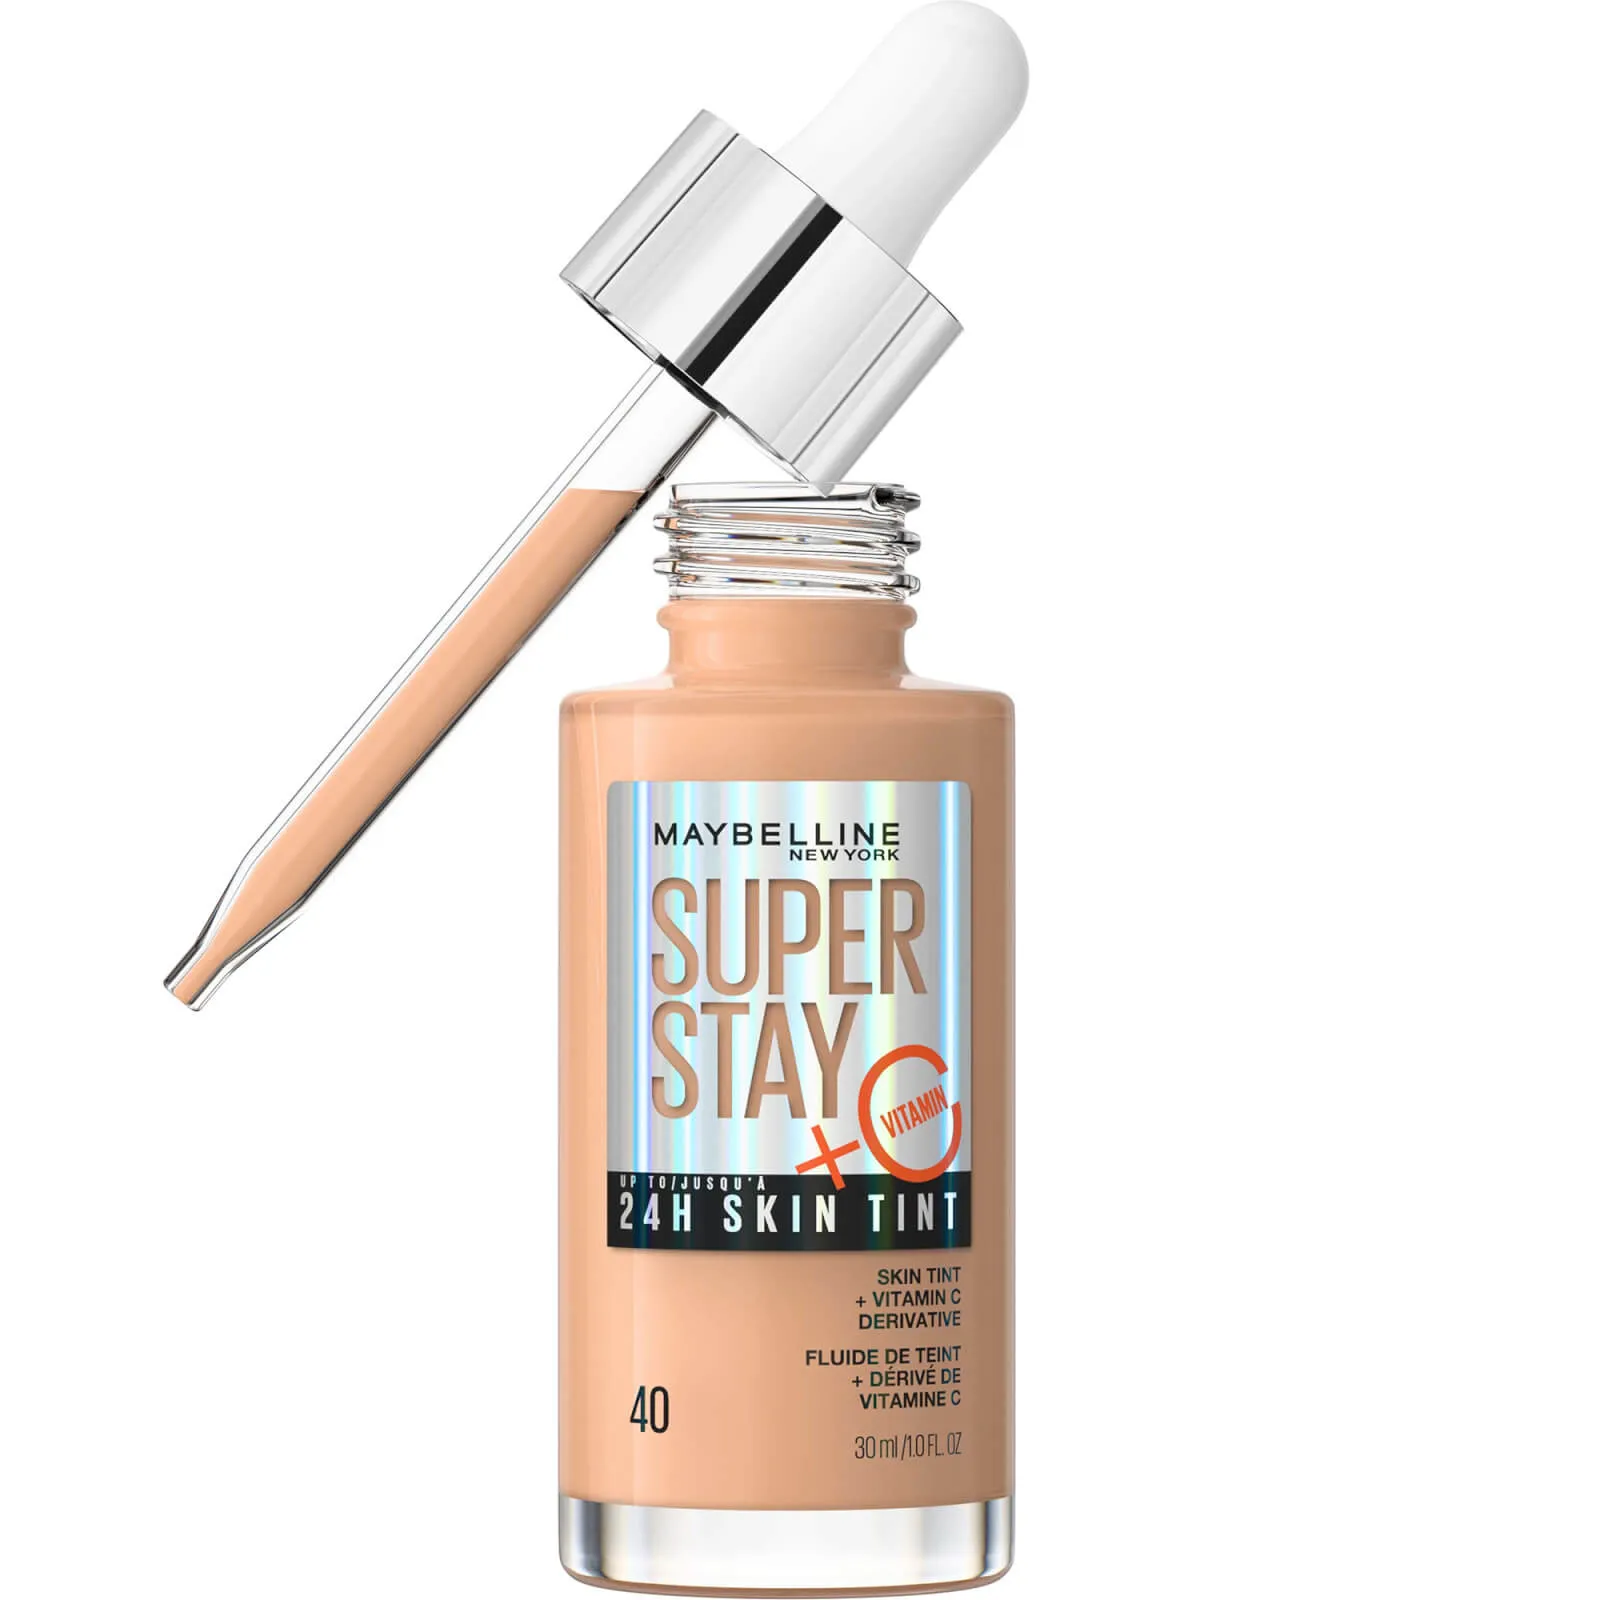  Super Stay up to 24H Skin Tint Foundation + Vitamin C 30ml (Various Shades) - 40